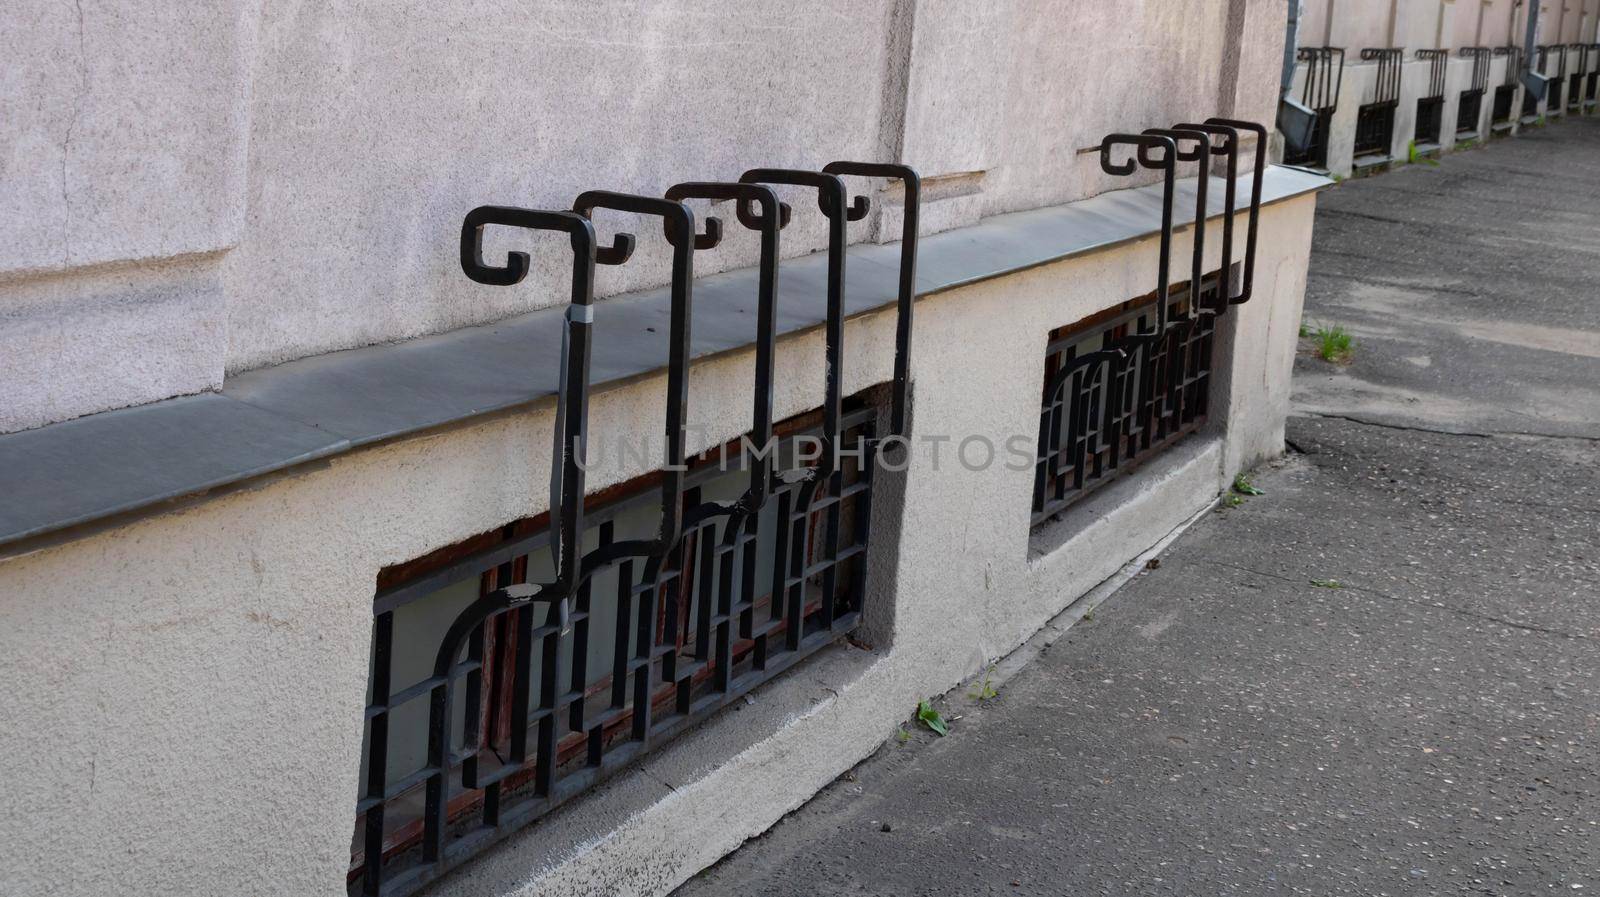 Wrought iron patterned grilles are installed outside on the first floor windows of the apartment building for safety. by lapushka62